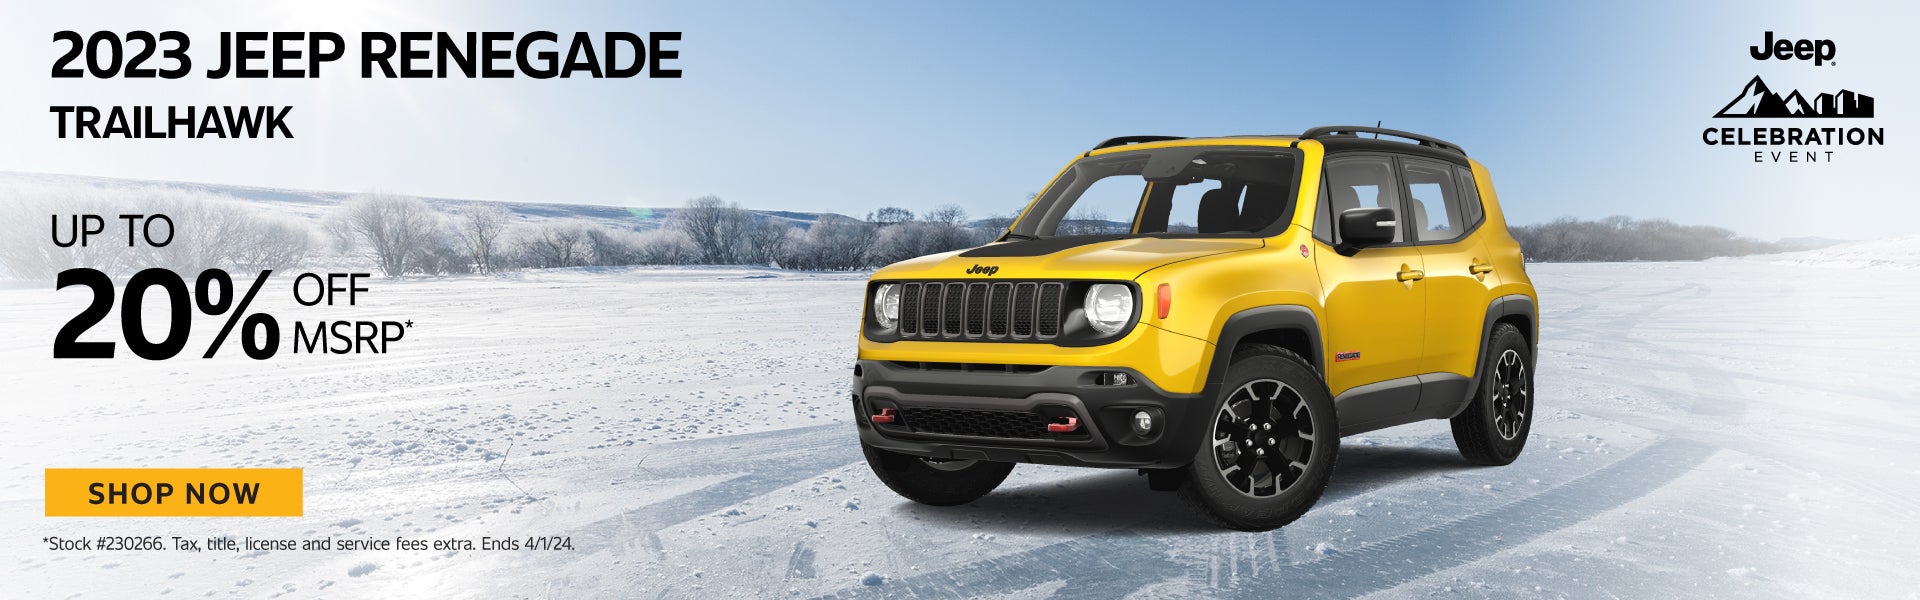 New 2023 Jeep Renegade Trailhawk Up to 20% Off MSRP